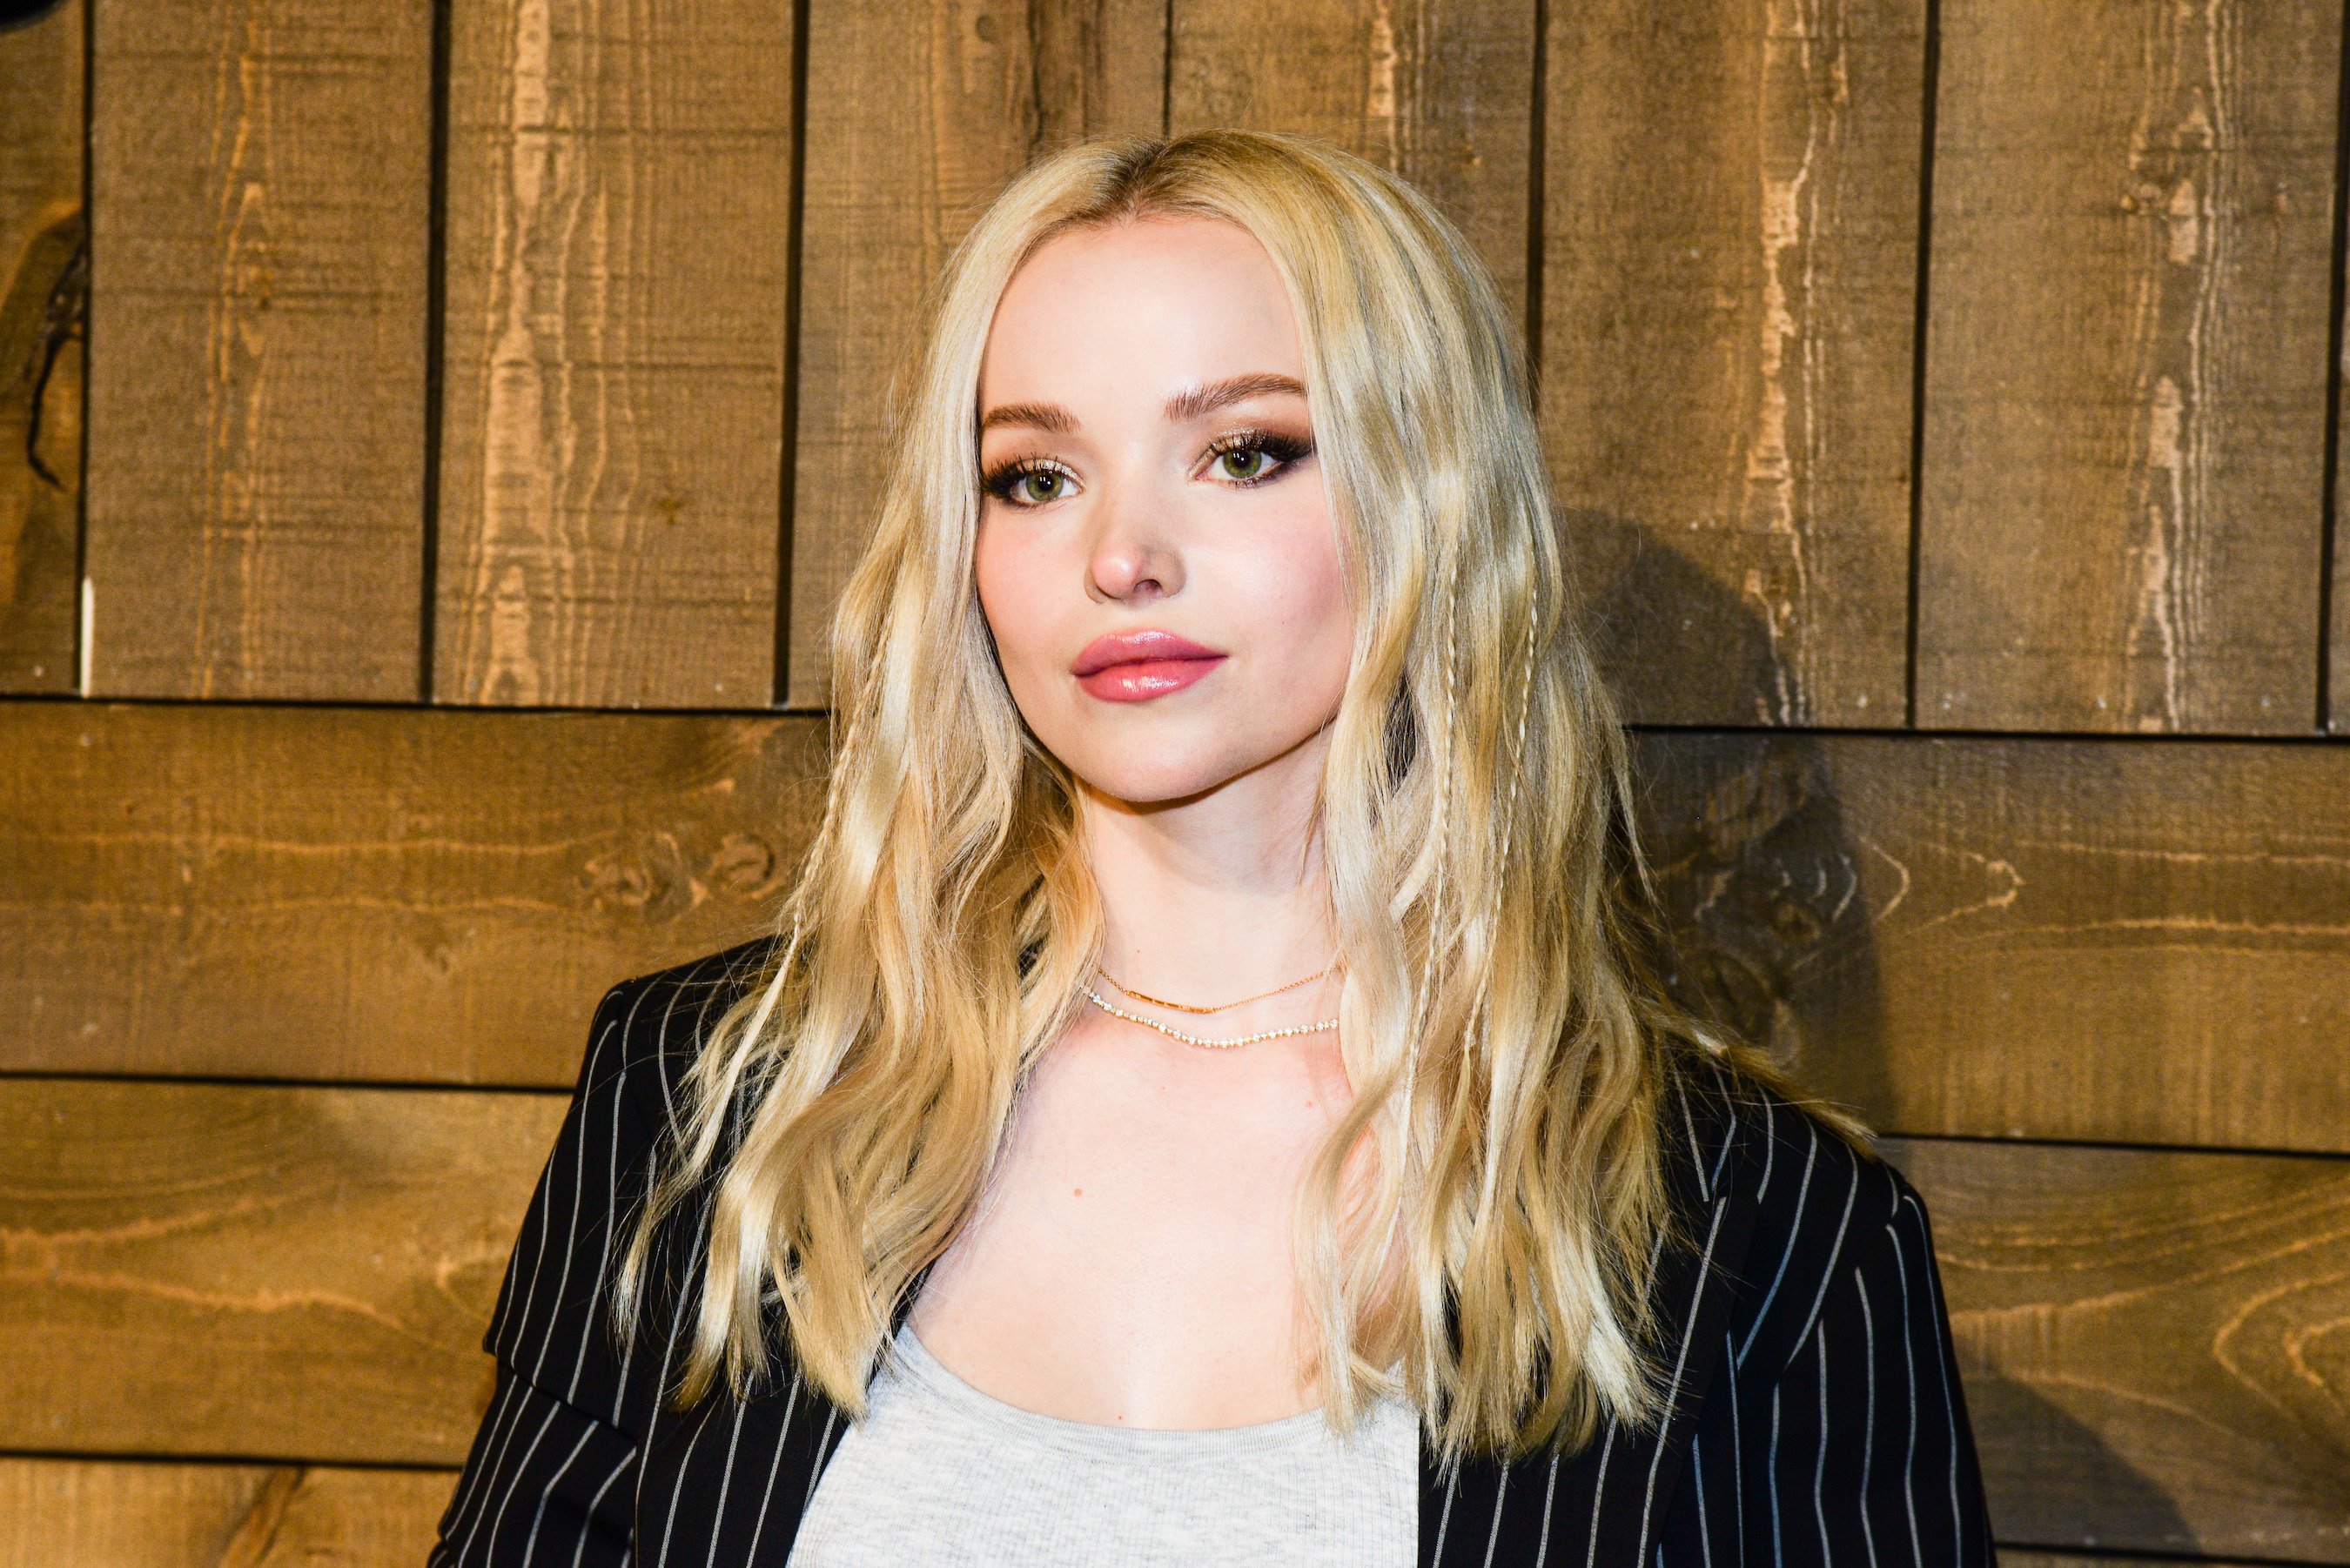 Dove Cameron attends the Michael Kors AW/20 Fashion Show